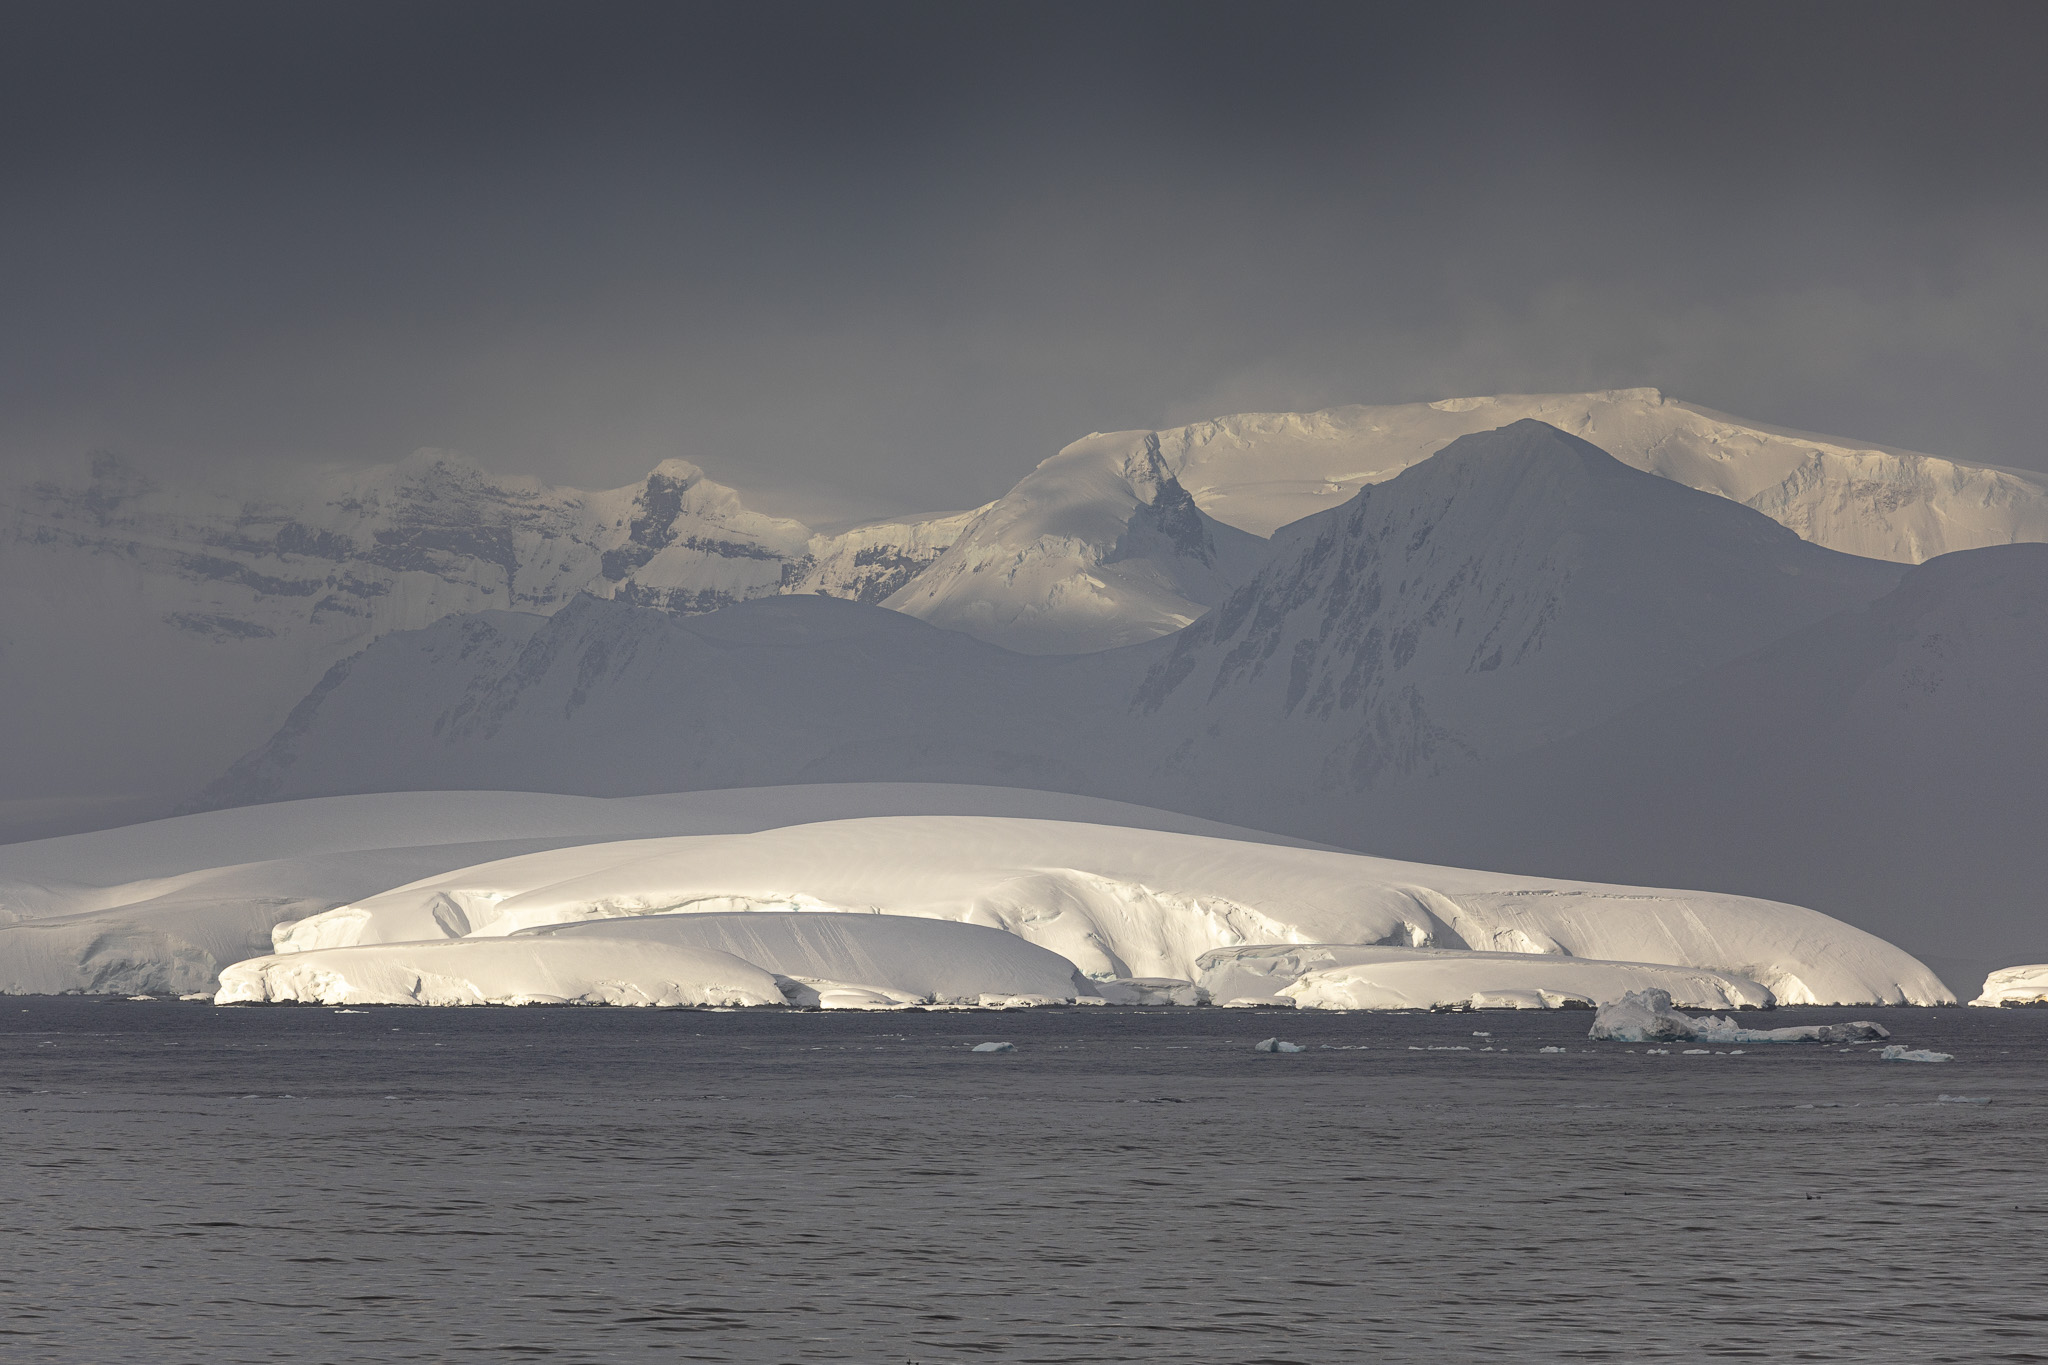 Looking north towards the exit of the Lemaire Channel at the Antarctic Peninsula